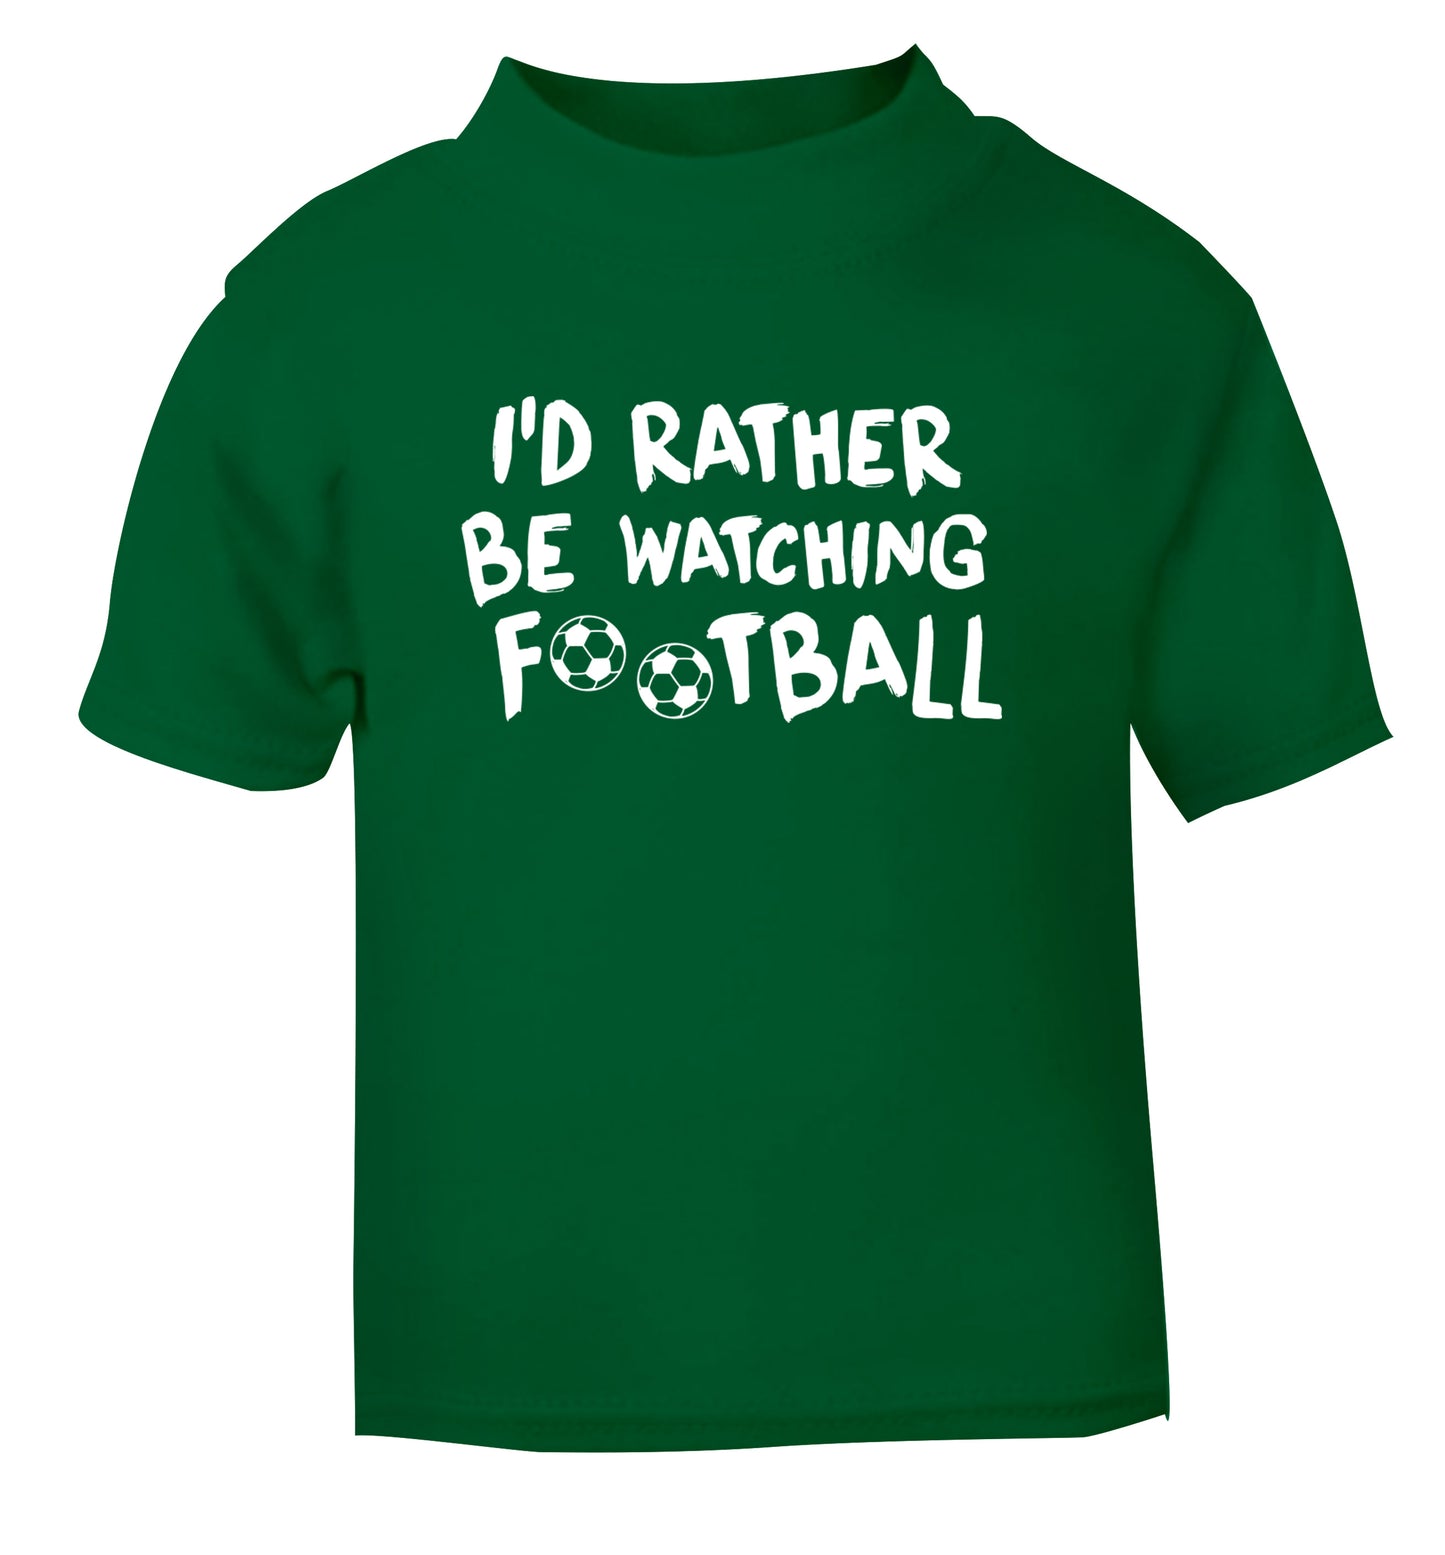 I'd rather be watching football green Baby Toddler Tshirt 2 Years